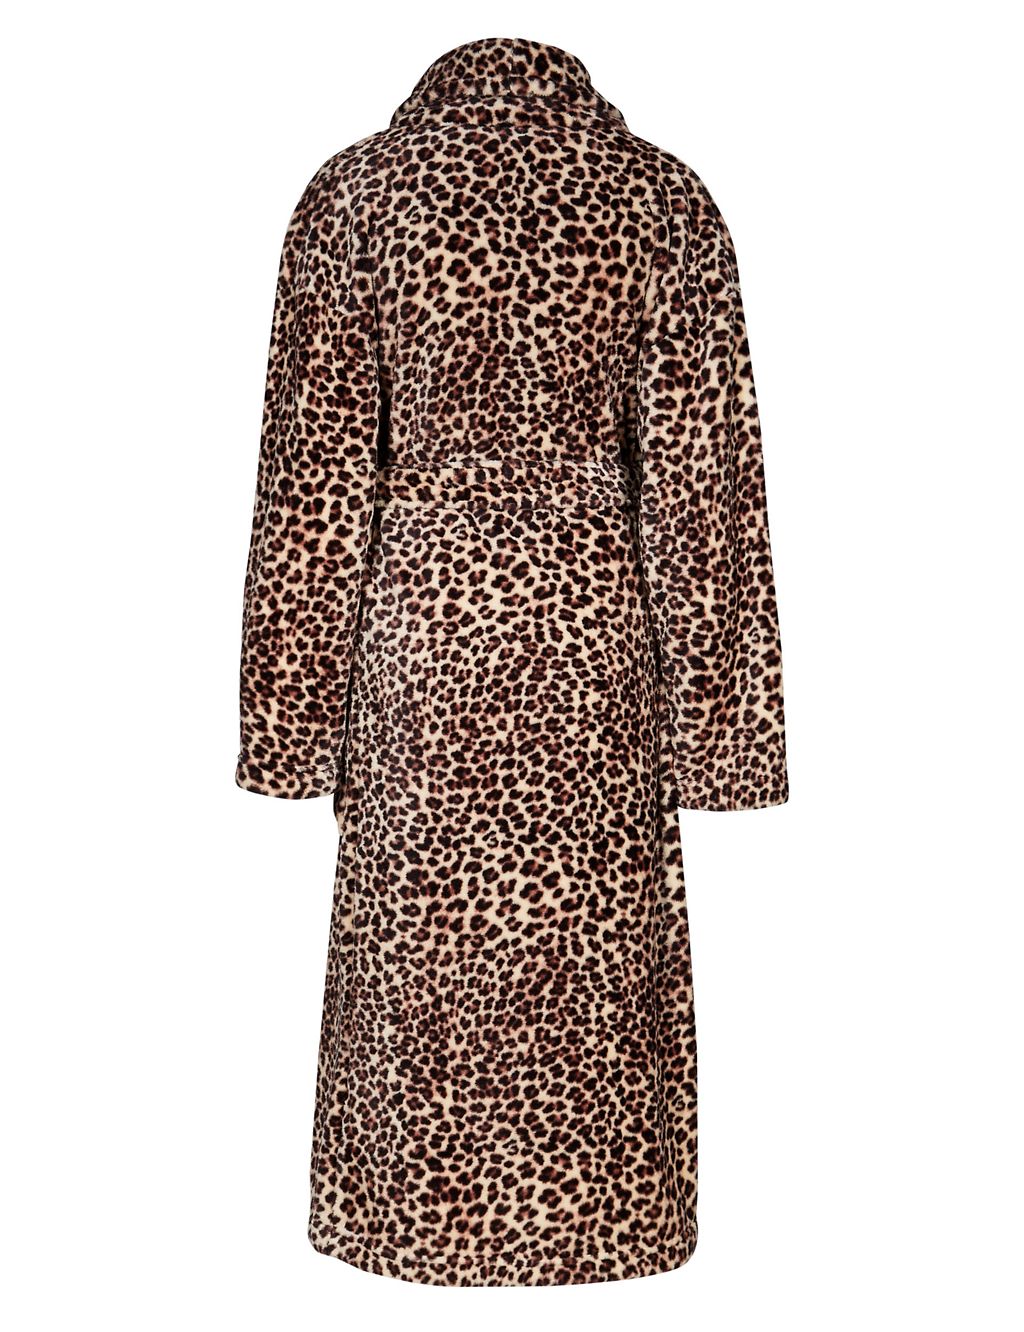 Leopard Print Dressing Gown with Belt 5 of 5